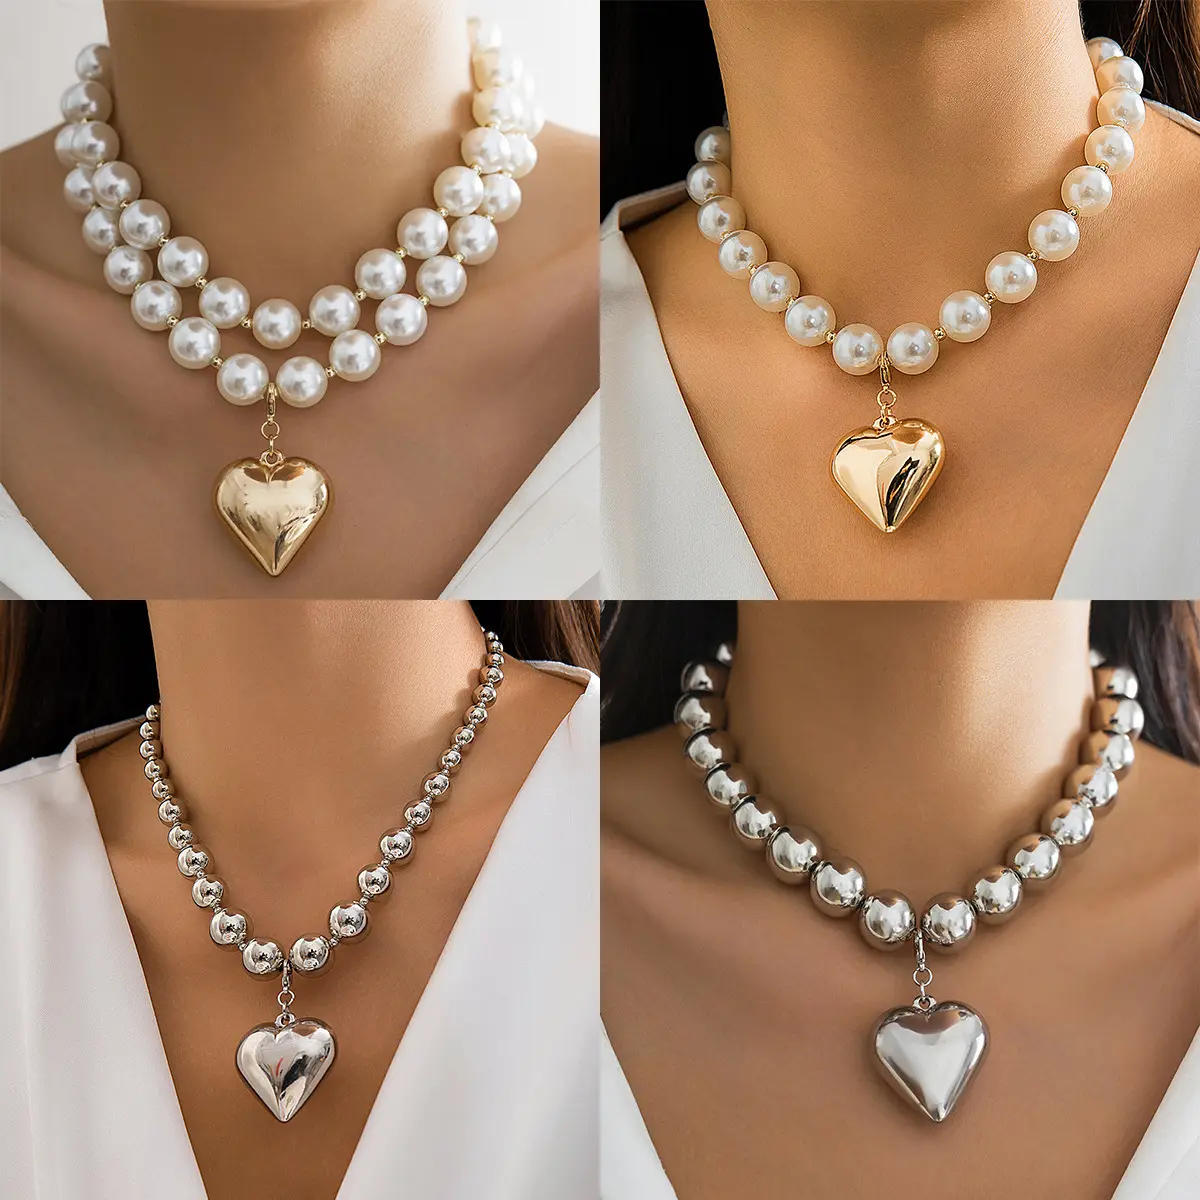 Hot Selling Big Gold Plated Beads Heart Shape Pendant Necklace For Women Punk Necklace Fashion Jewelry Choker